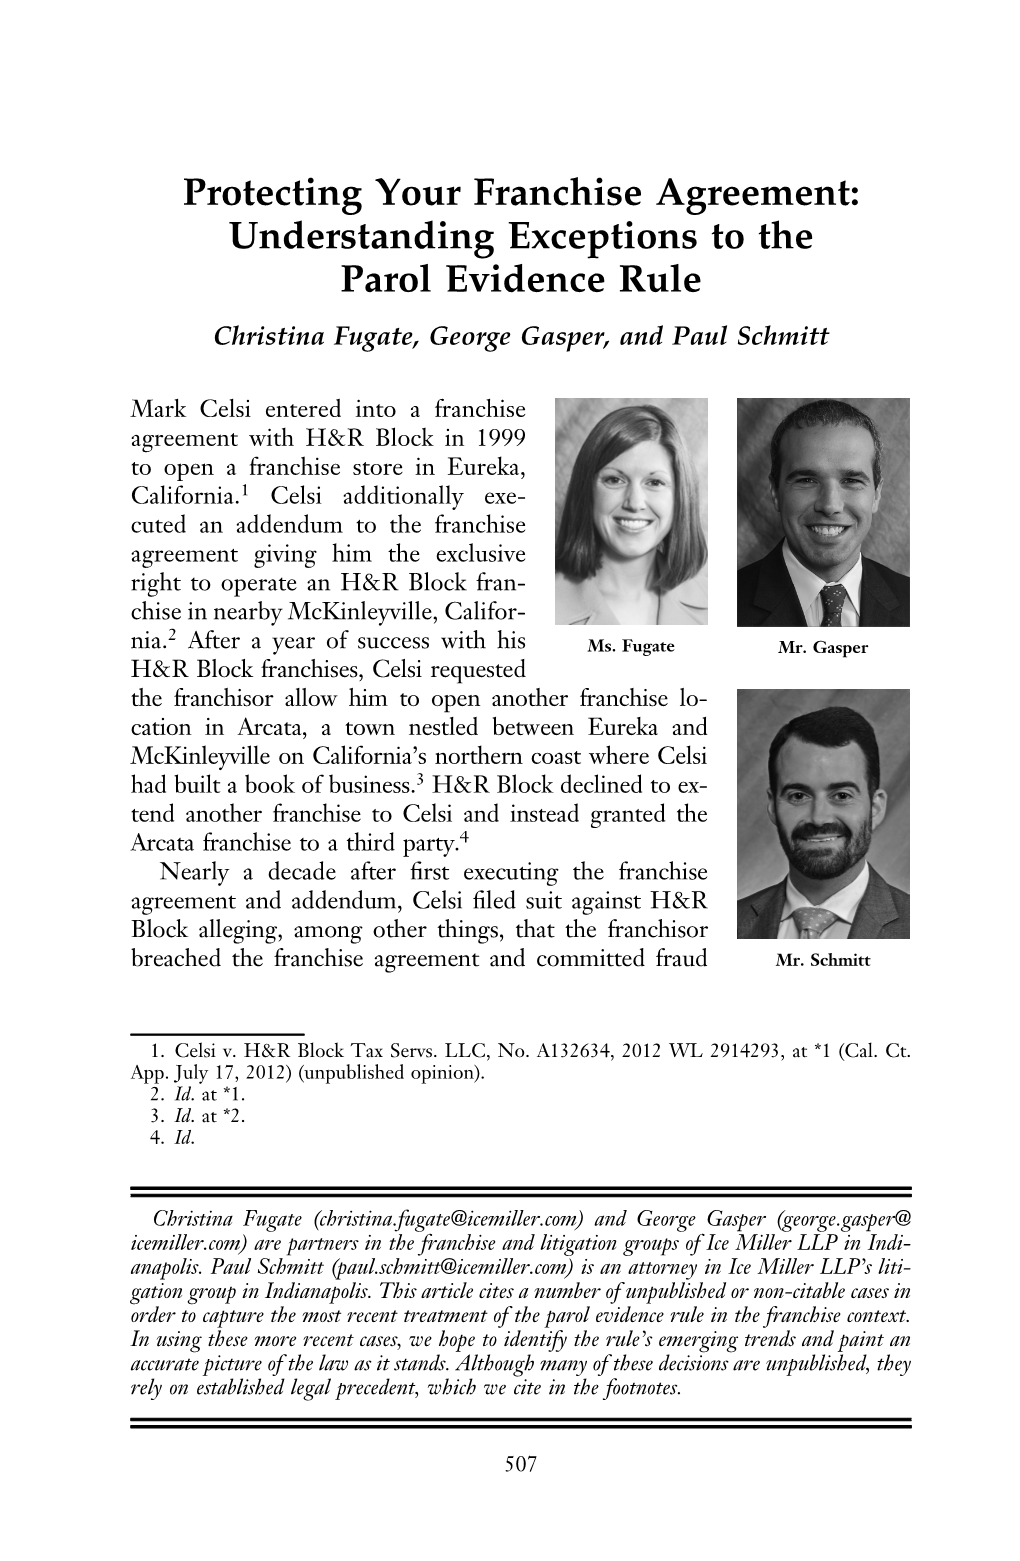 Understanding Exceptions to the Parol Evidence Rule Christina Fugate, George Gasper, and Paul Schmitt